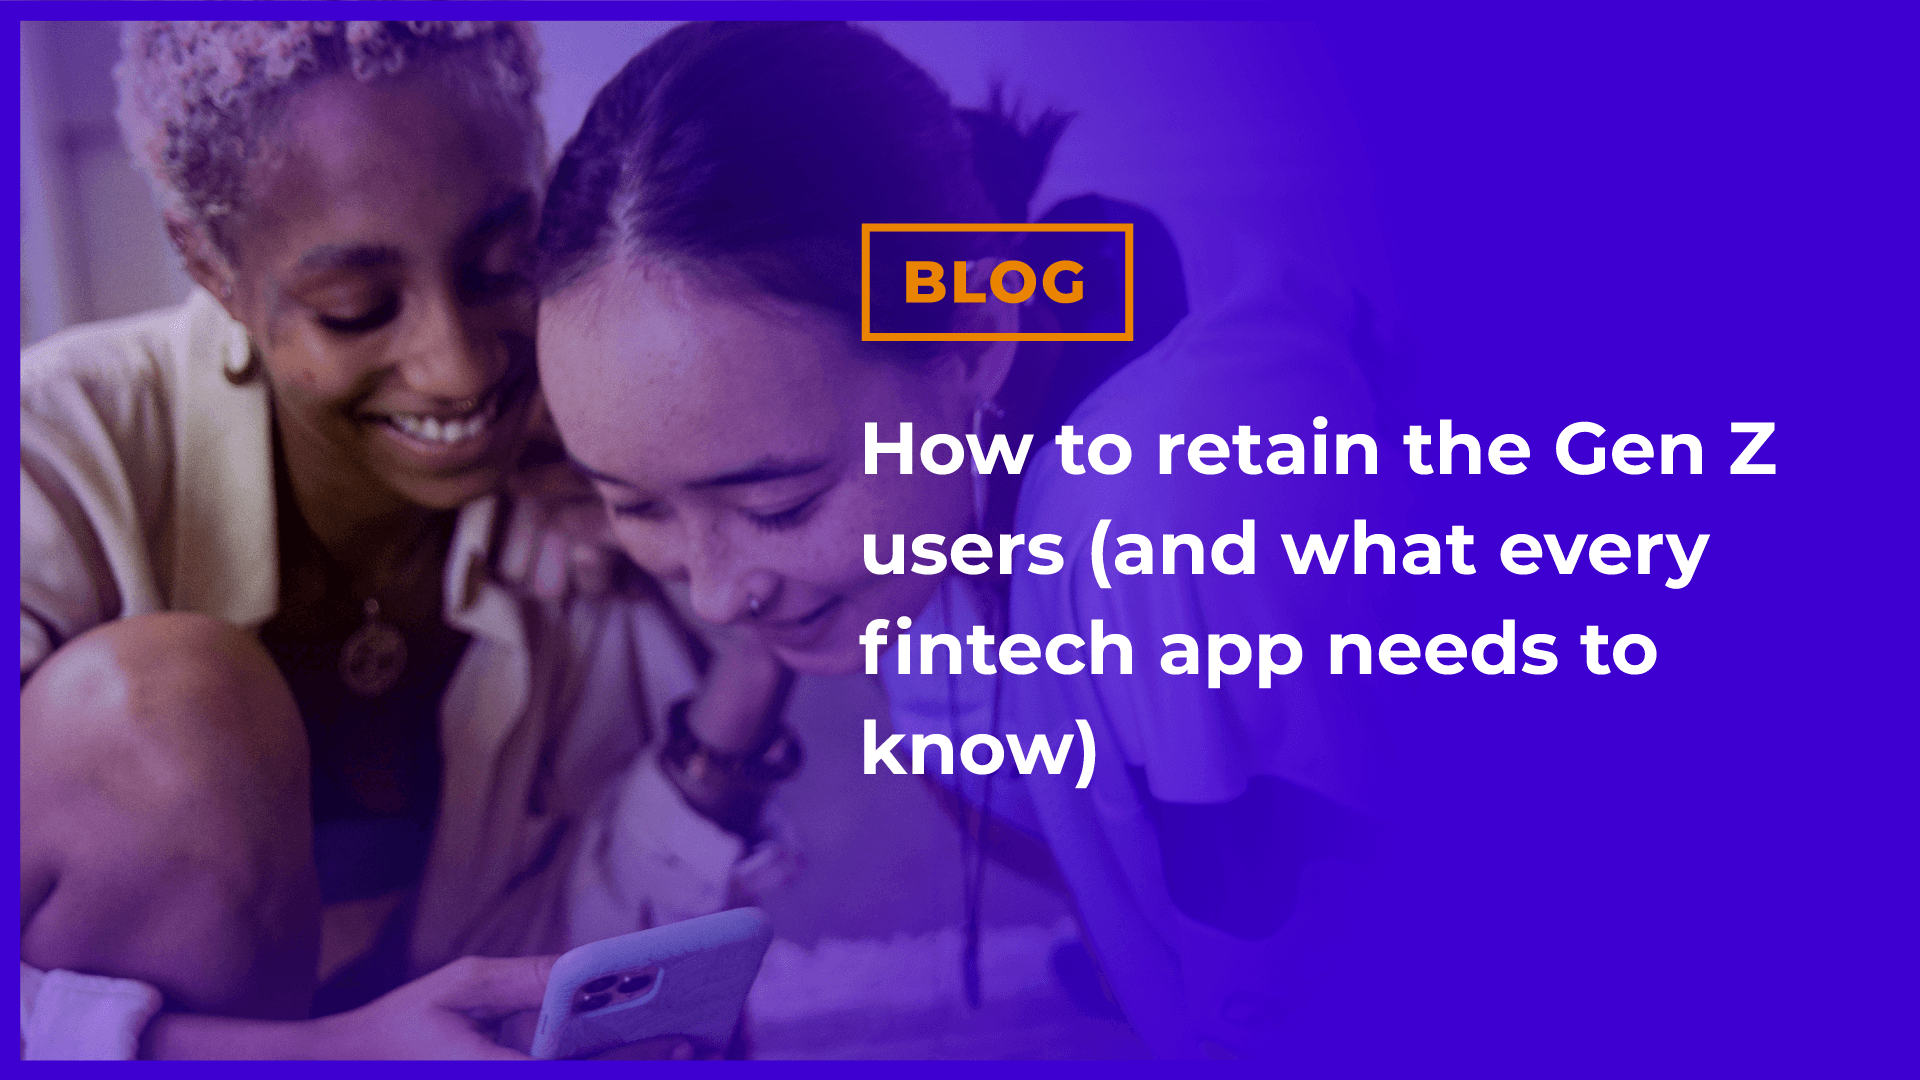 How to retain the Gen Z users (and what every fintech app needs to know)